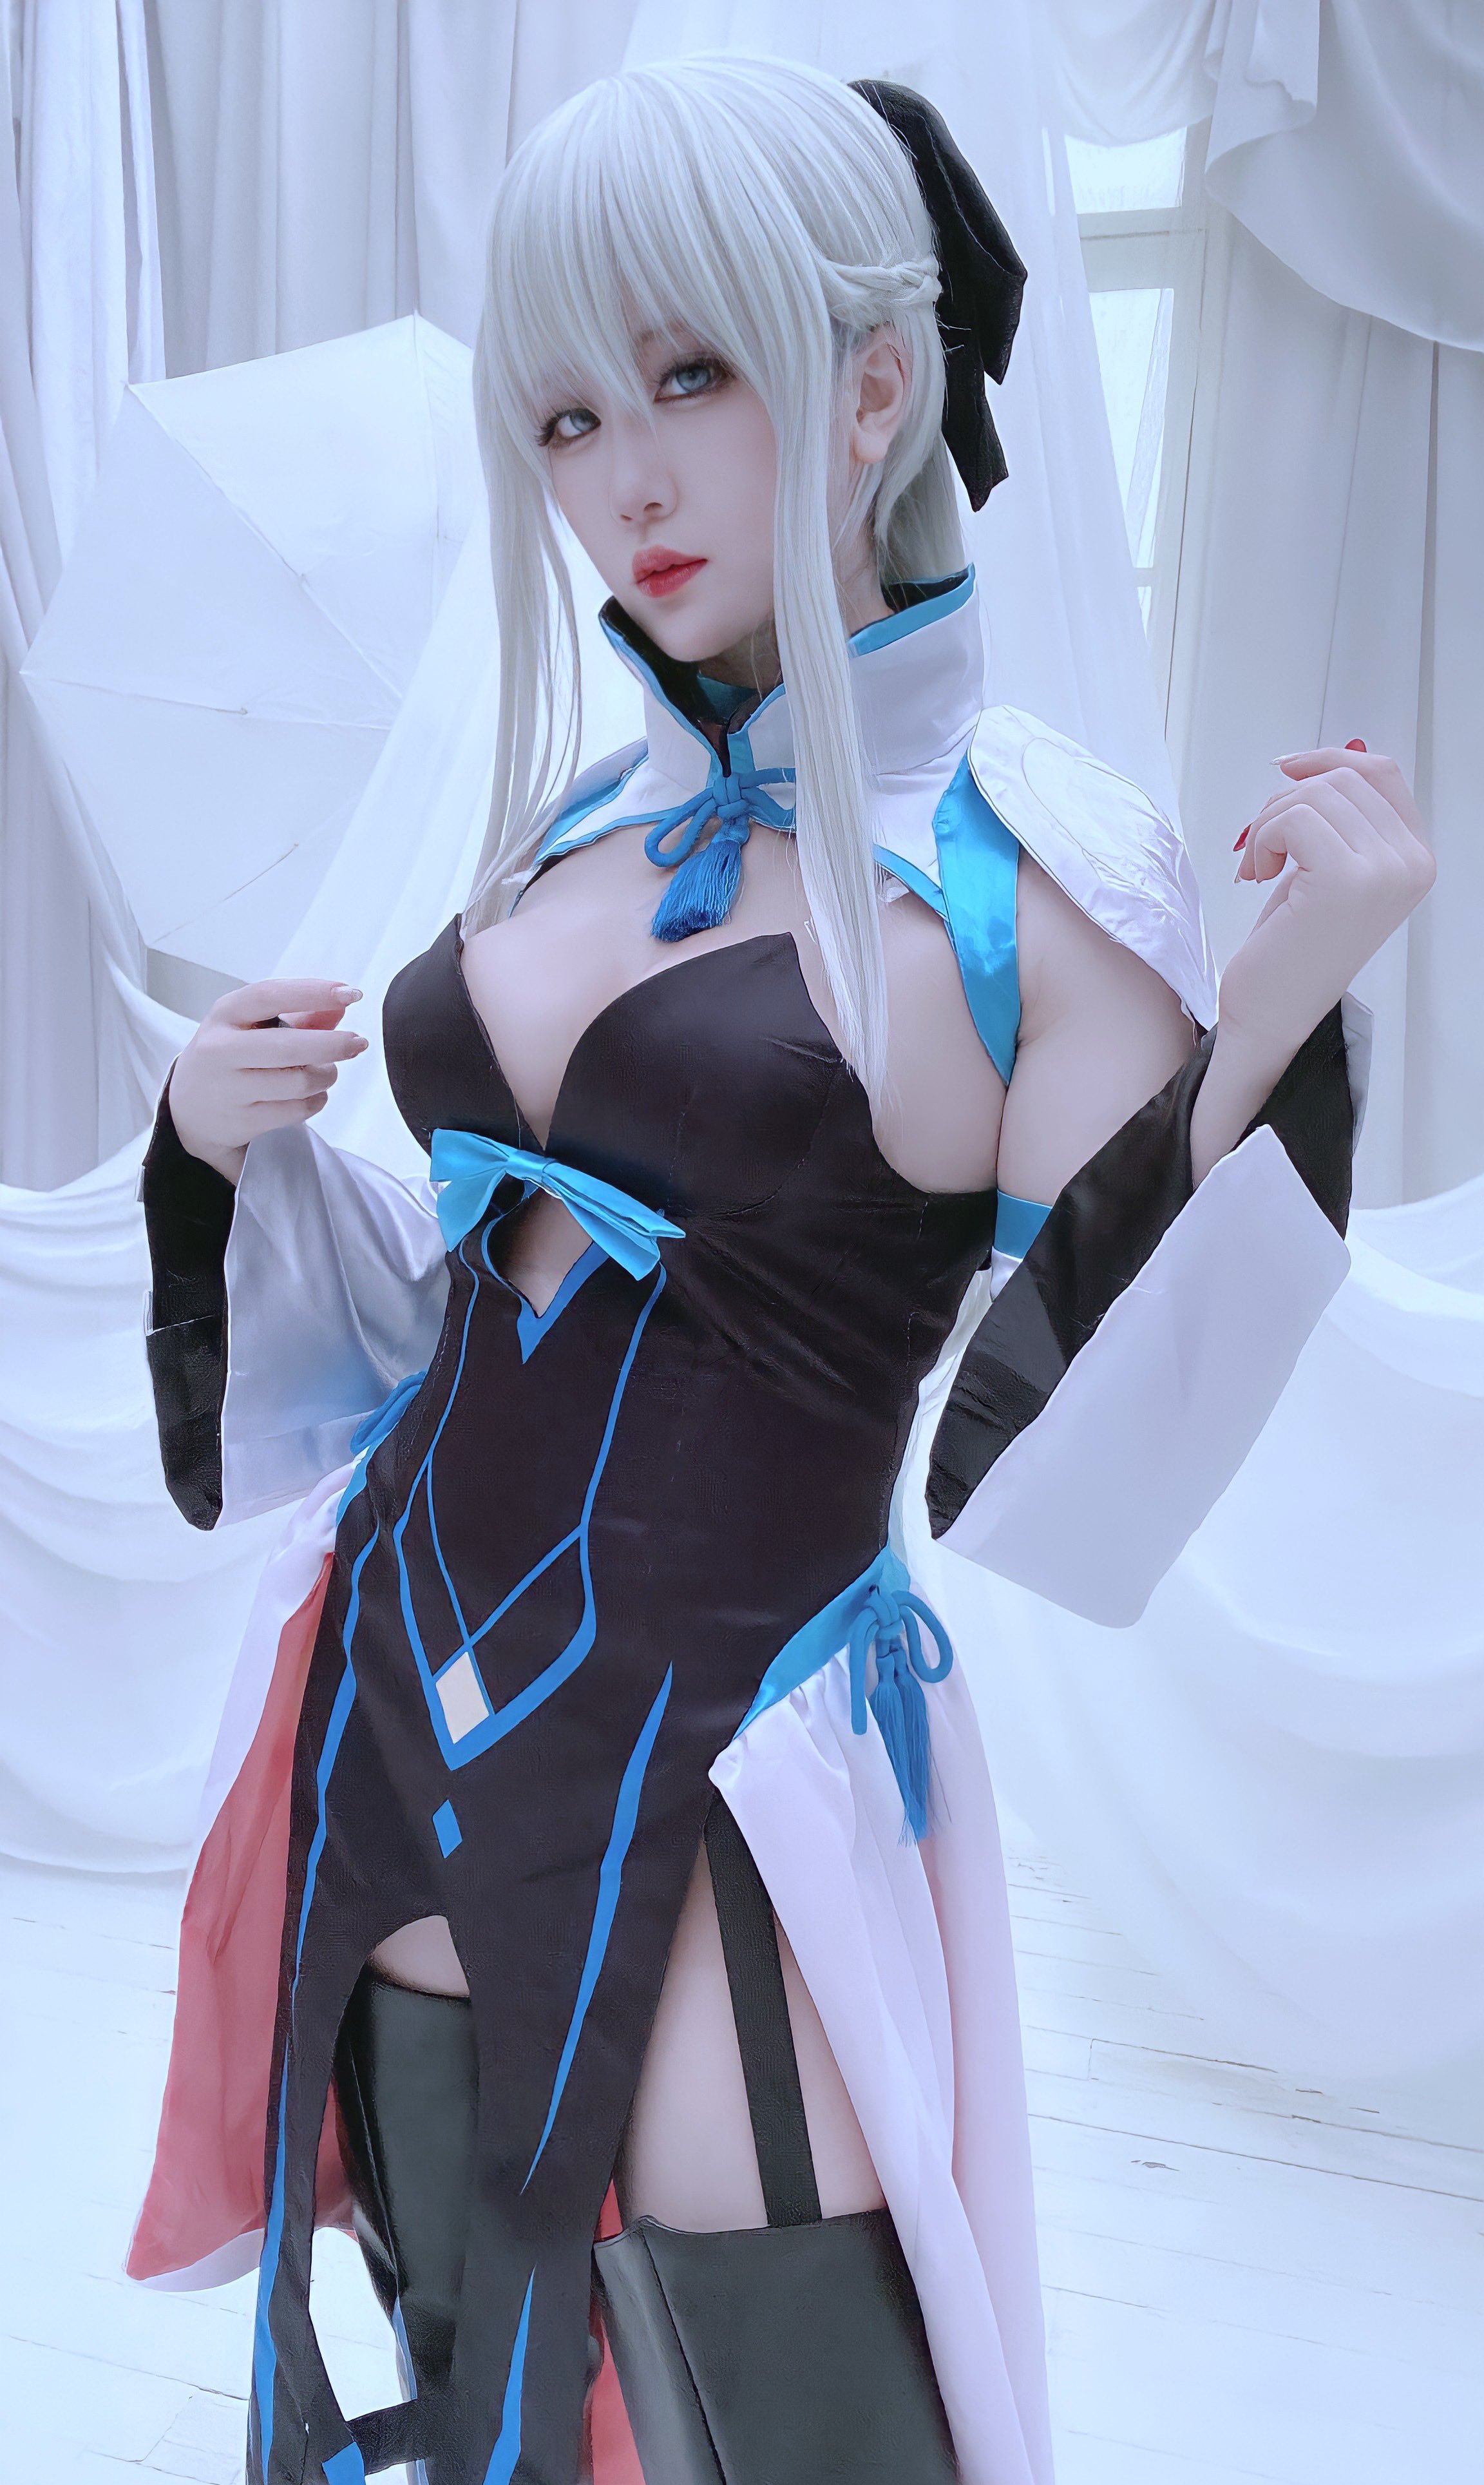 Asian Asian Cosplayer Japanese Japanese Women Cosplay Women Fate Series Fate Grand Order Morgan Le F 2304x3857